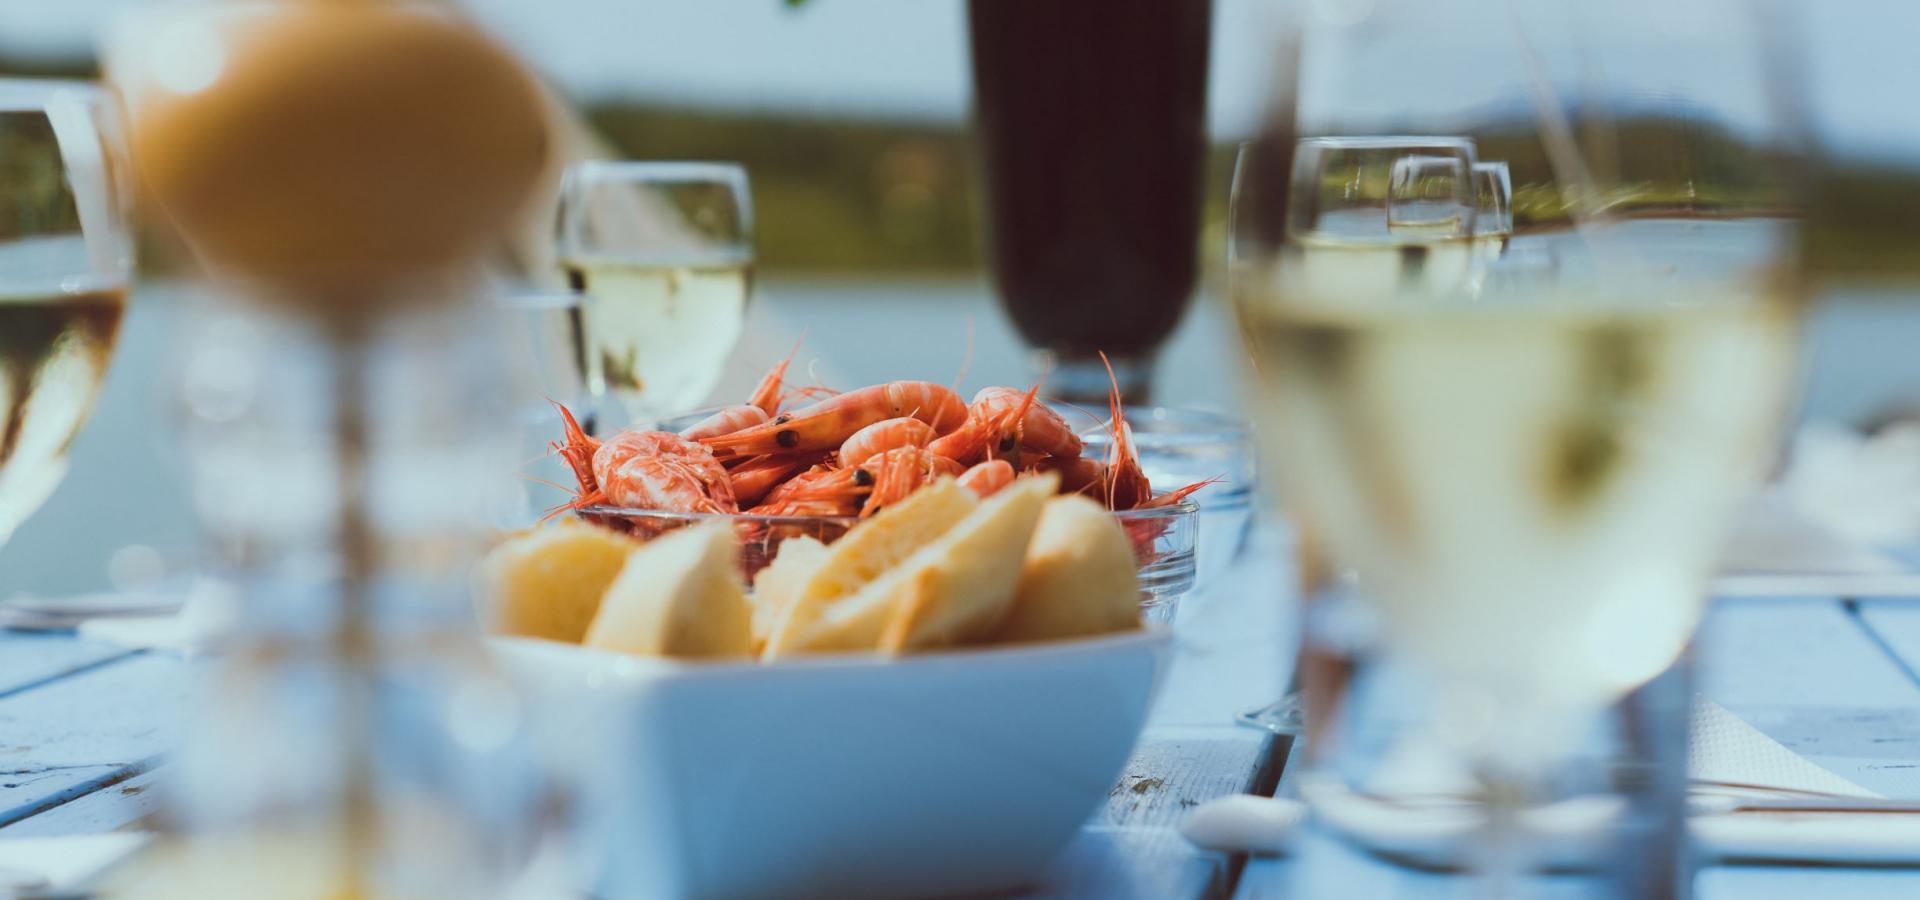 A summer table with glasses of wine, bowls with with bread and shrimps